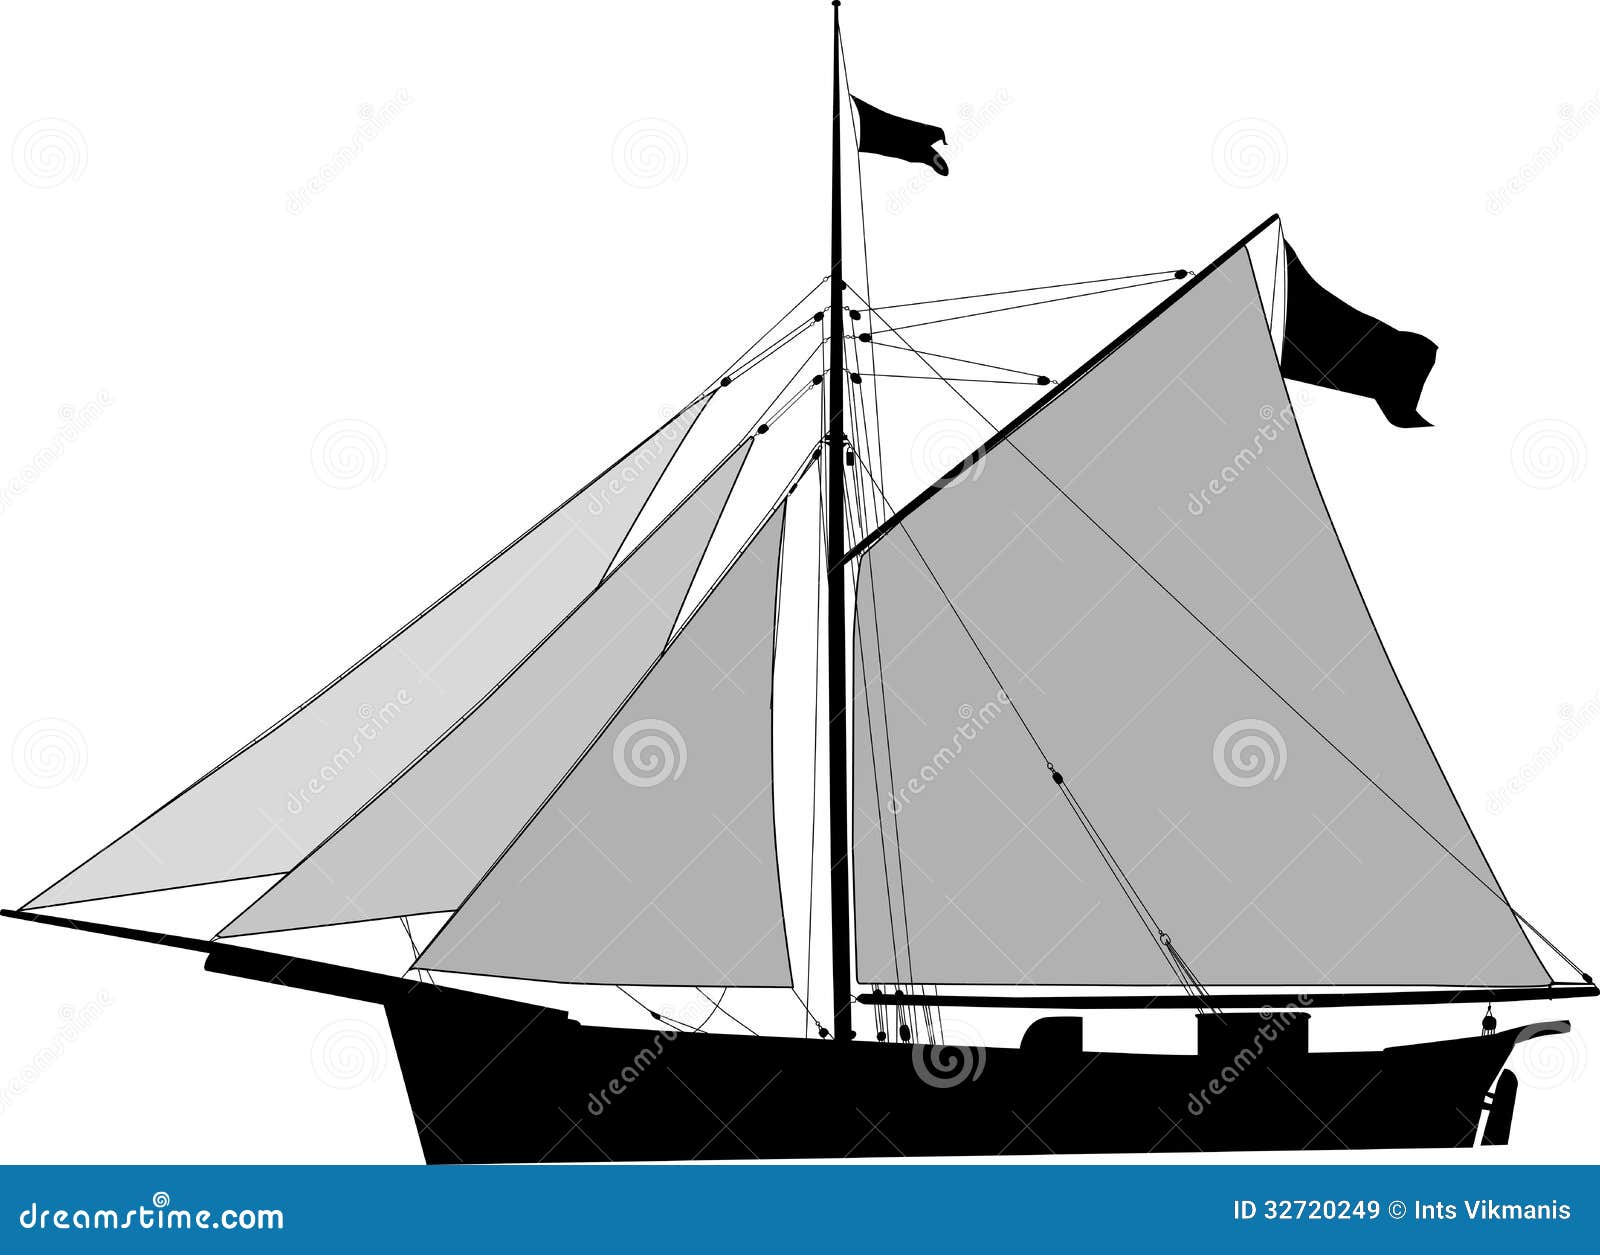 Cutter, Sailing Cargo Vessel Royalty Free Stock Images 